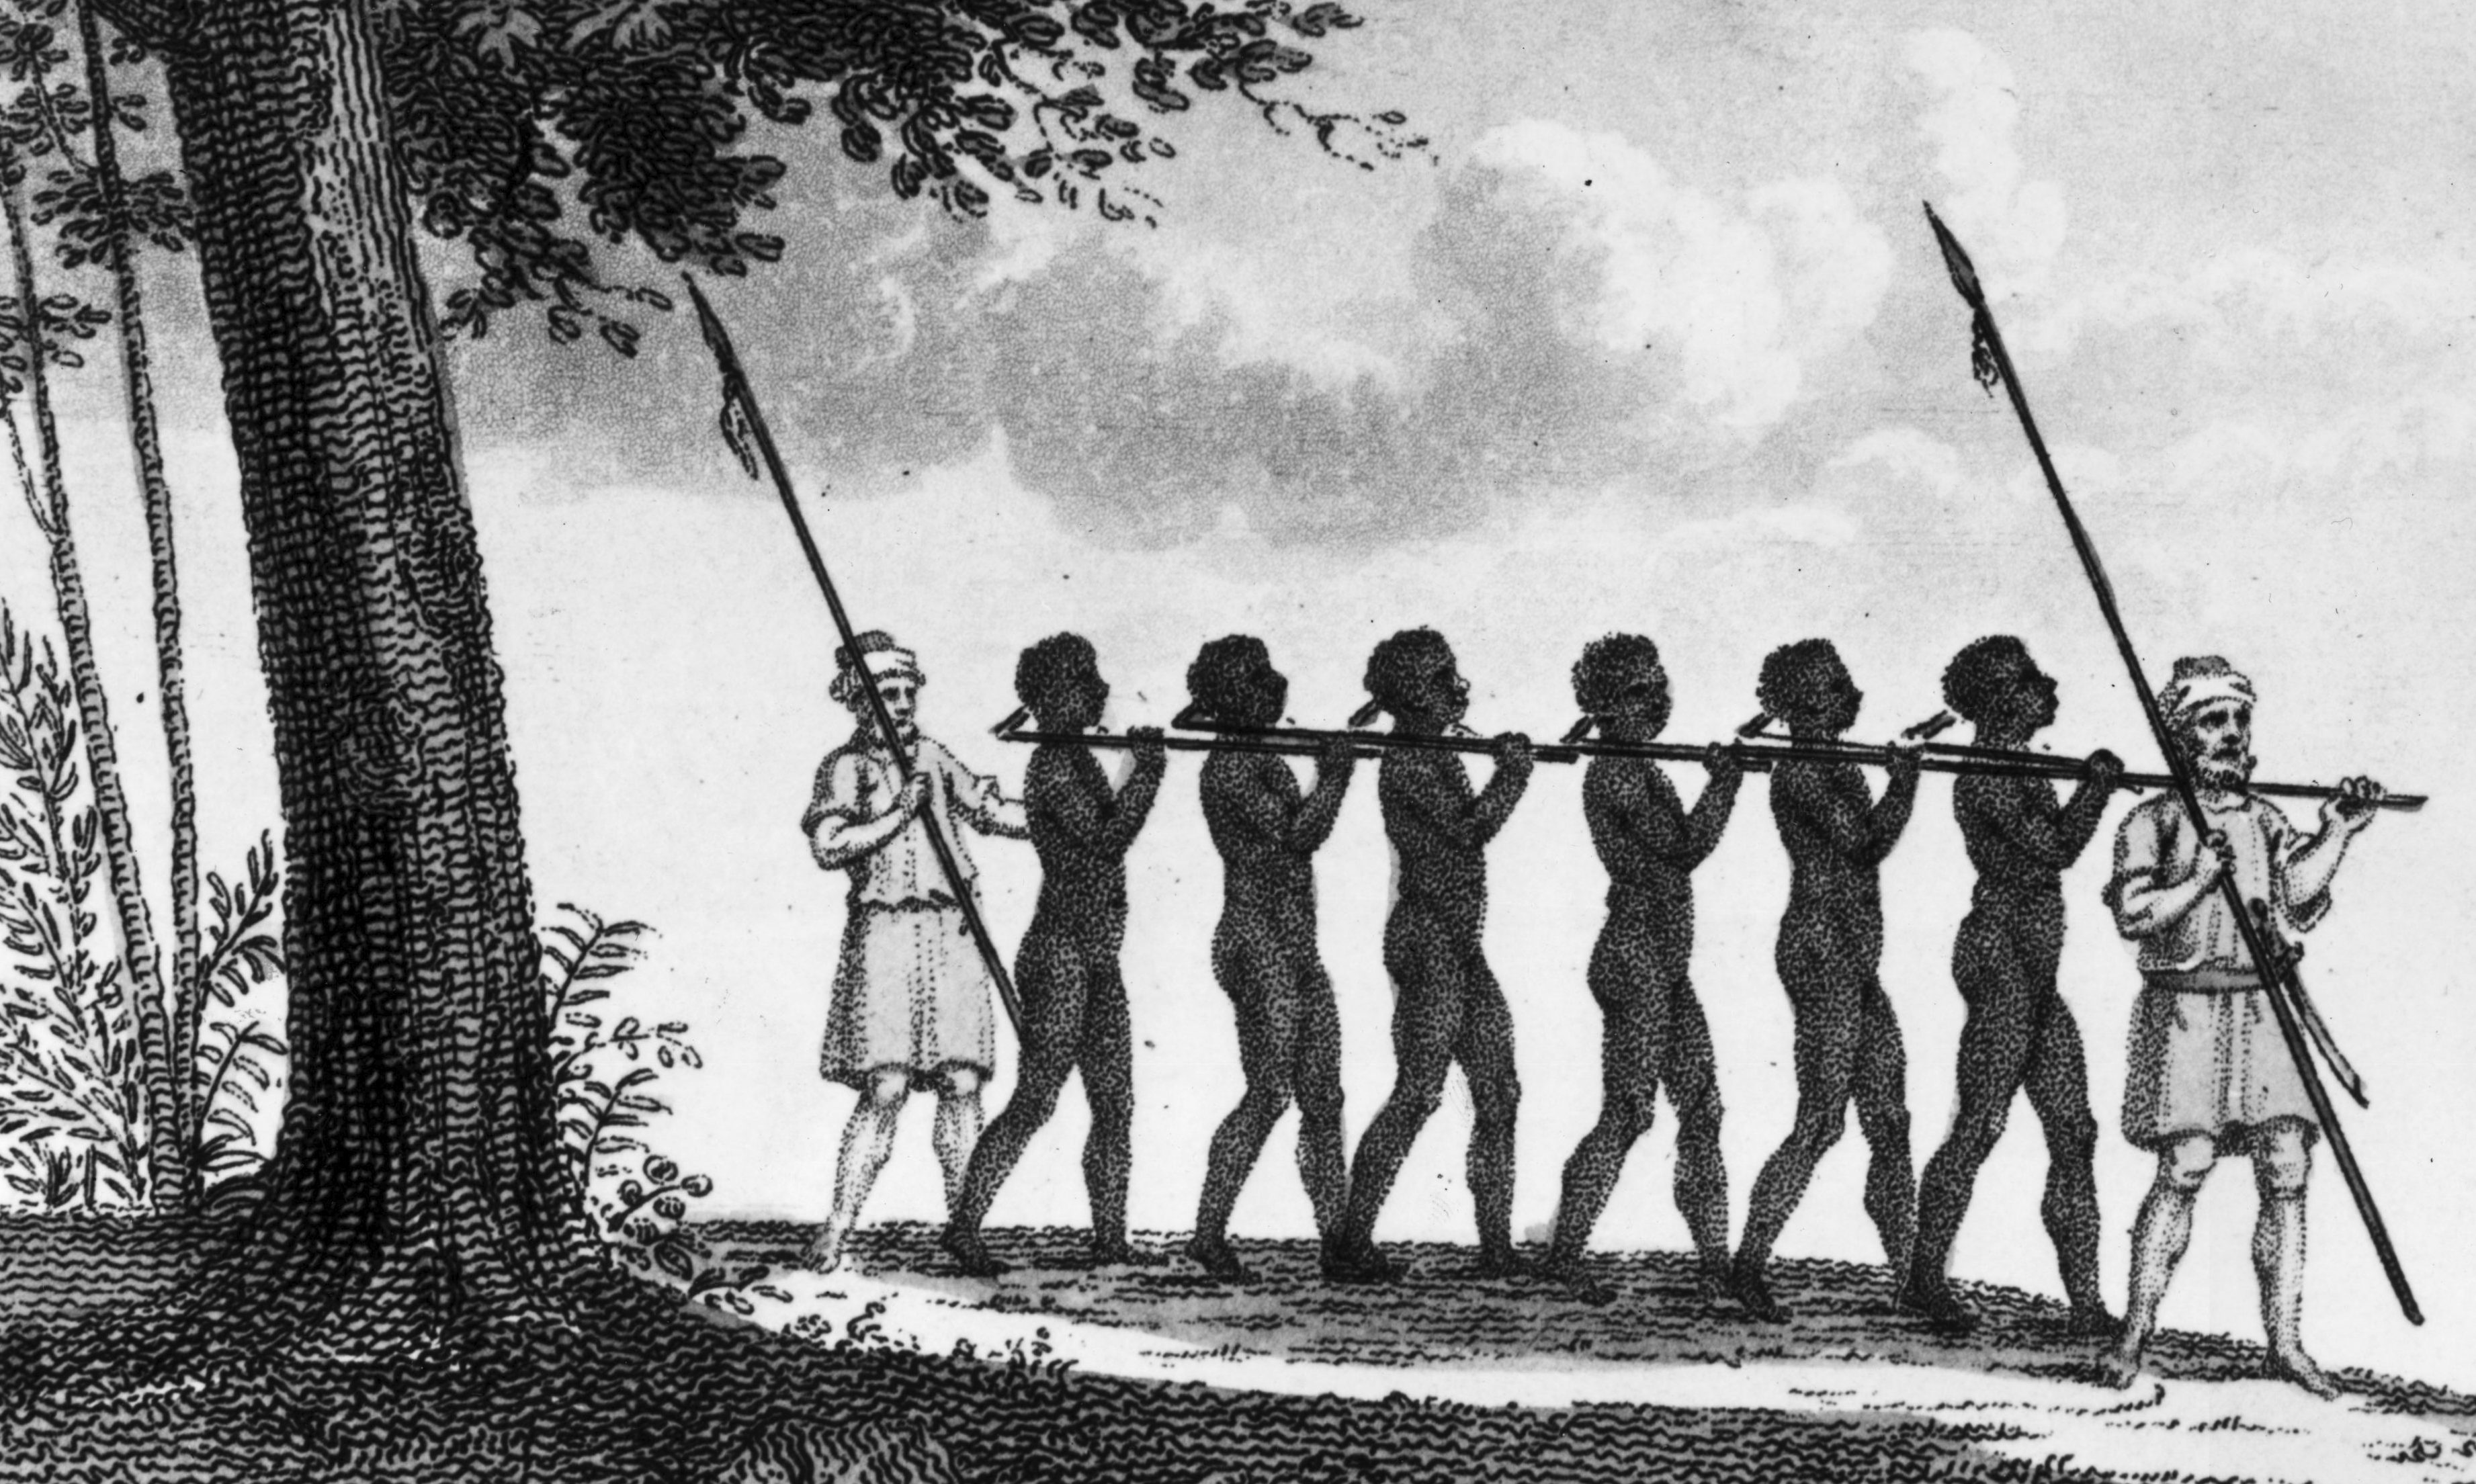 Has Scotland’s role in the slave trade largely been airbrushed from history?